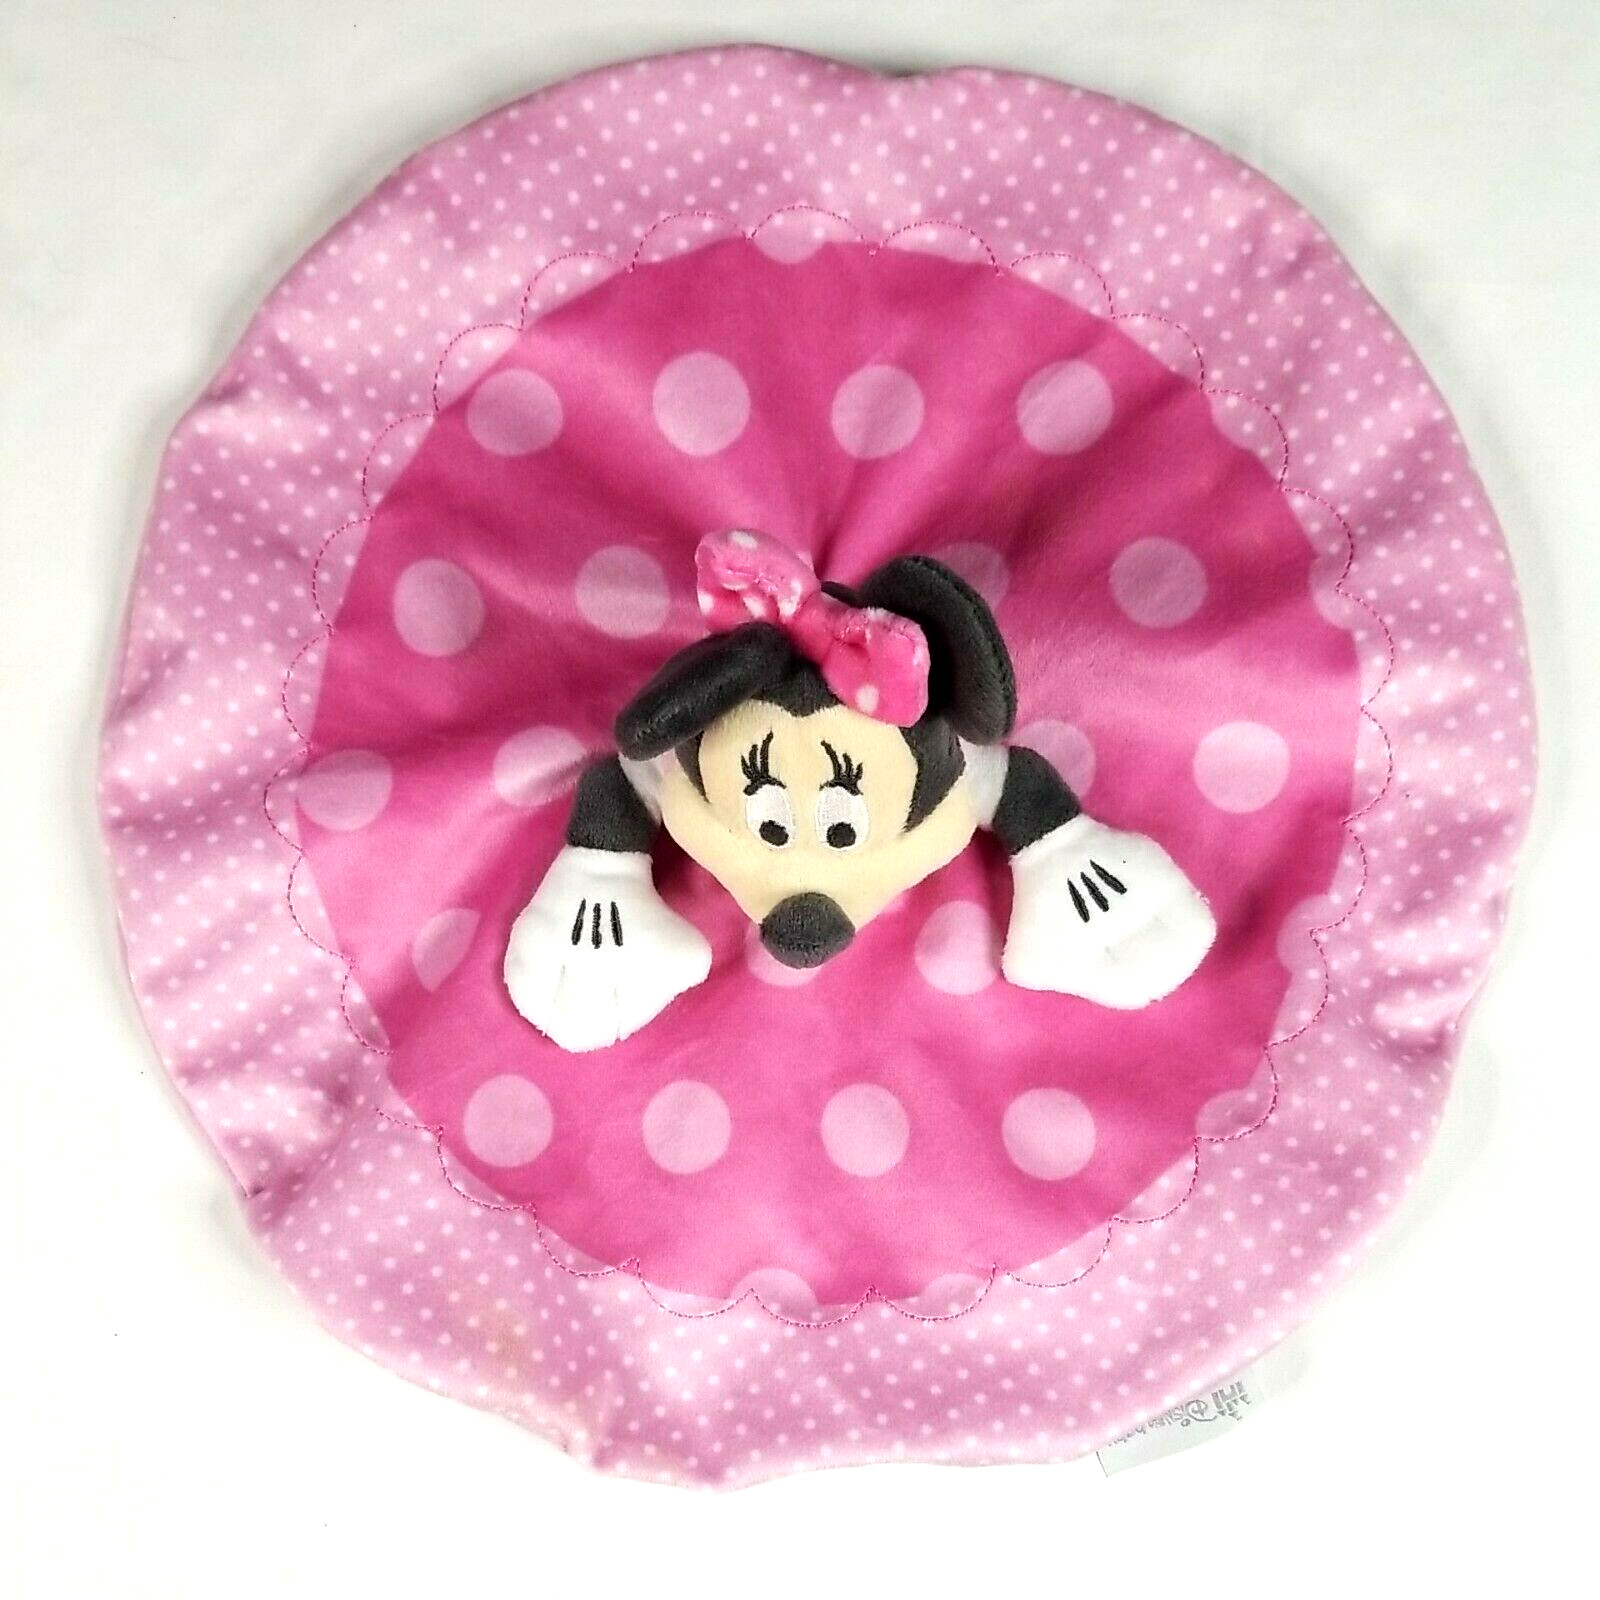 Disney Baby MINNIE MOUSE 12" Round Security Blanket Lovey Pink - Disney Store